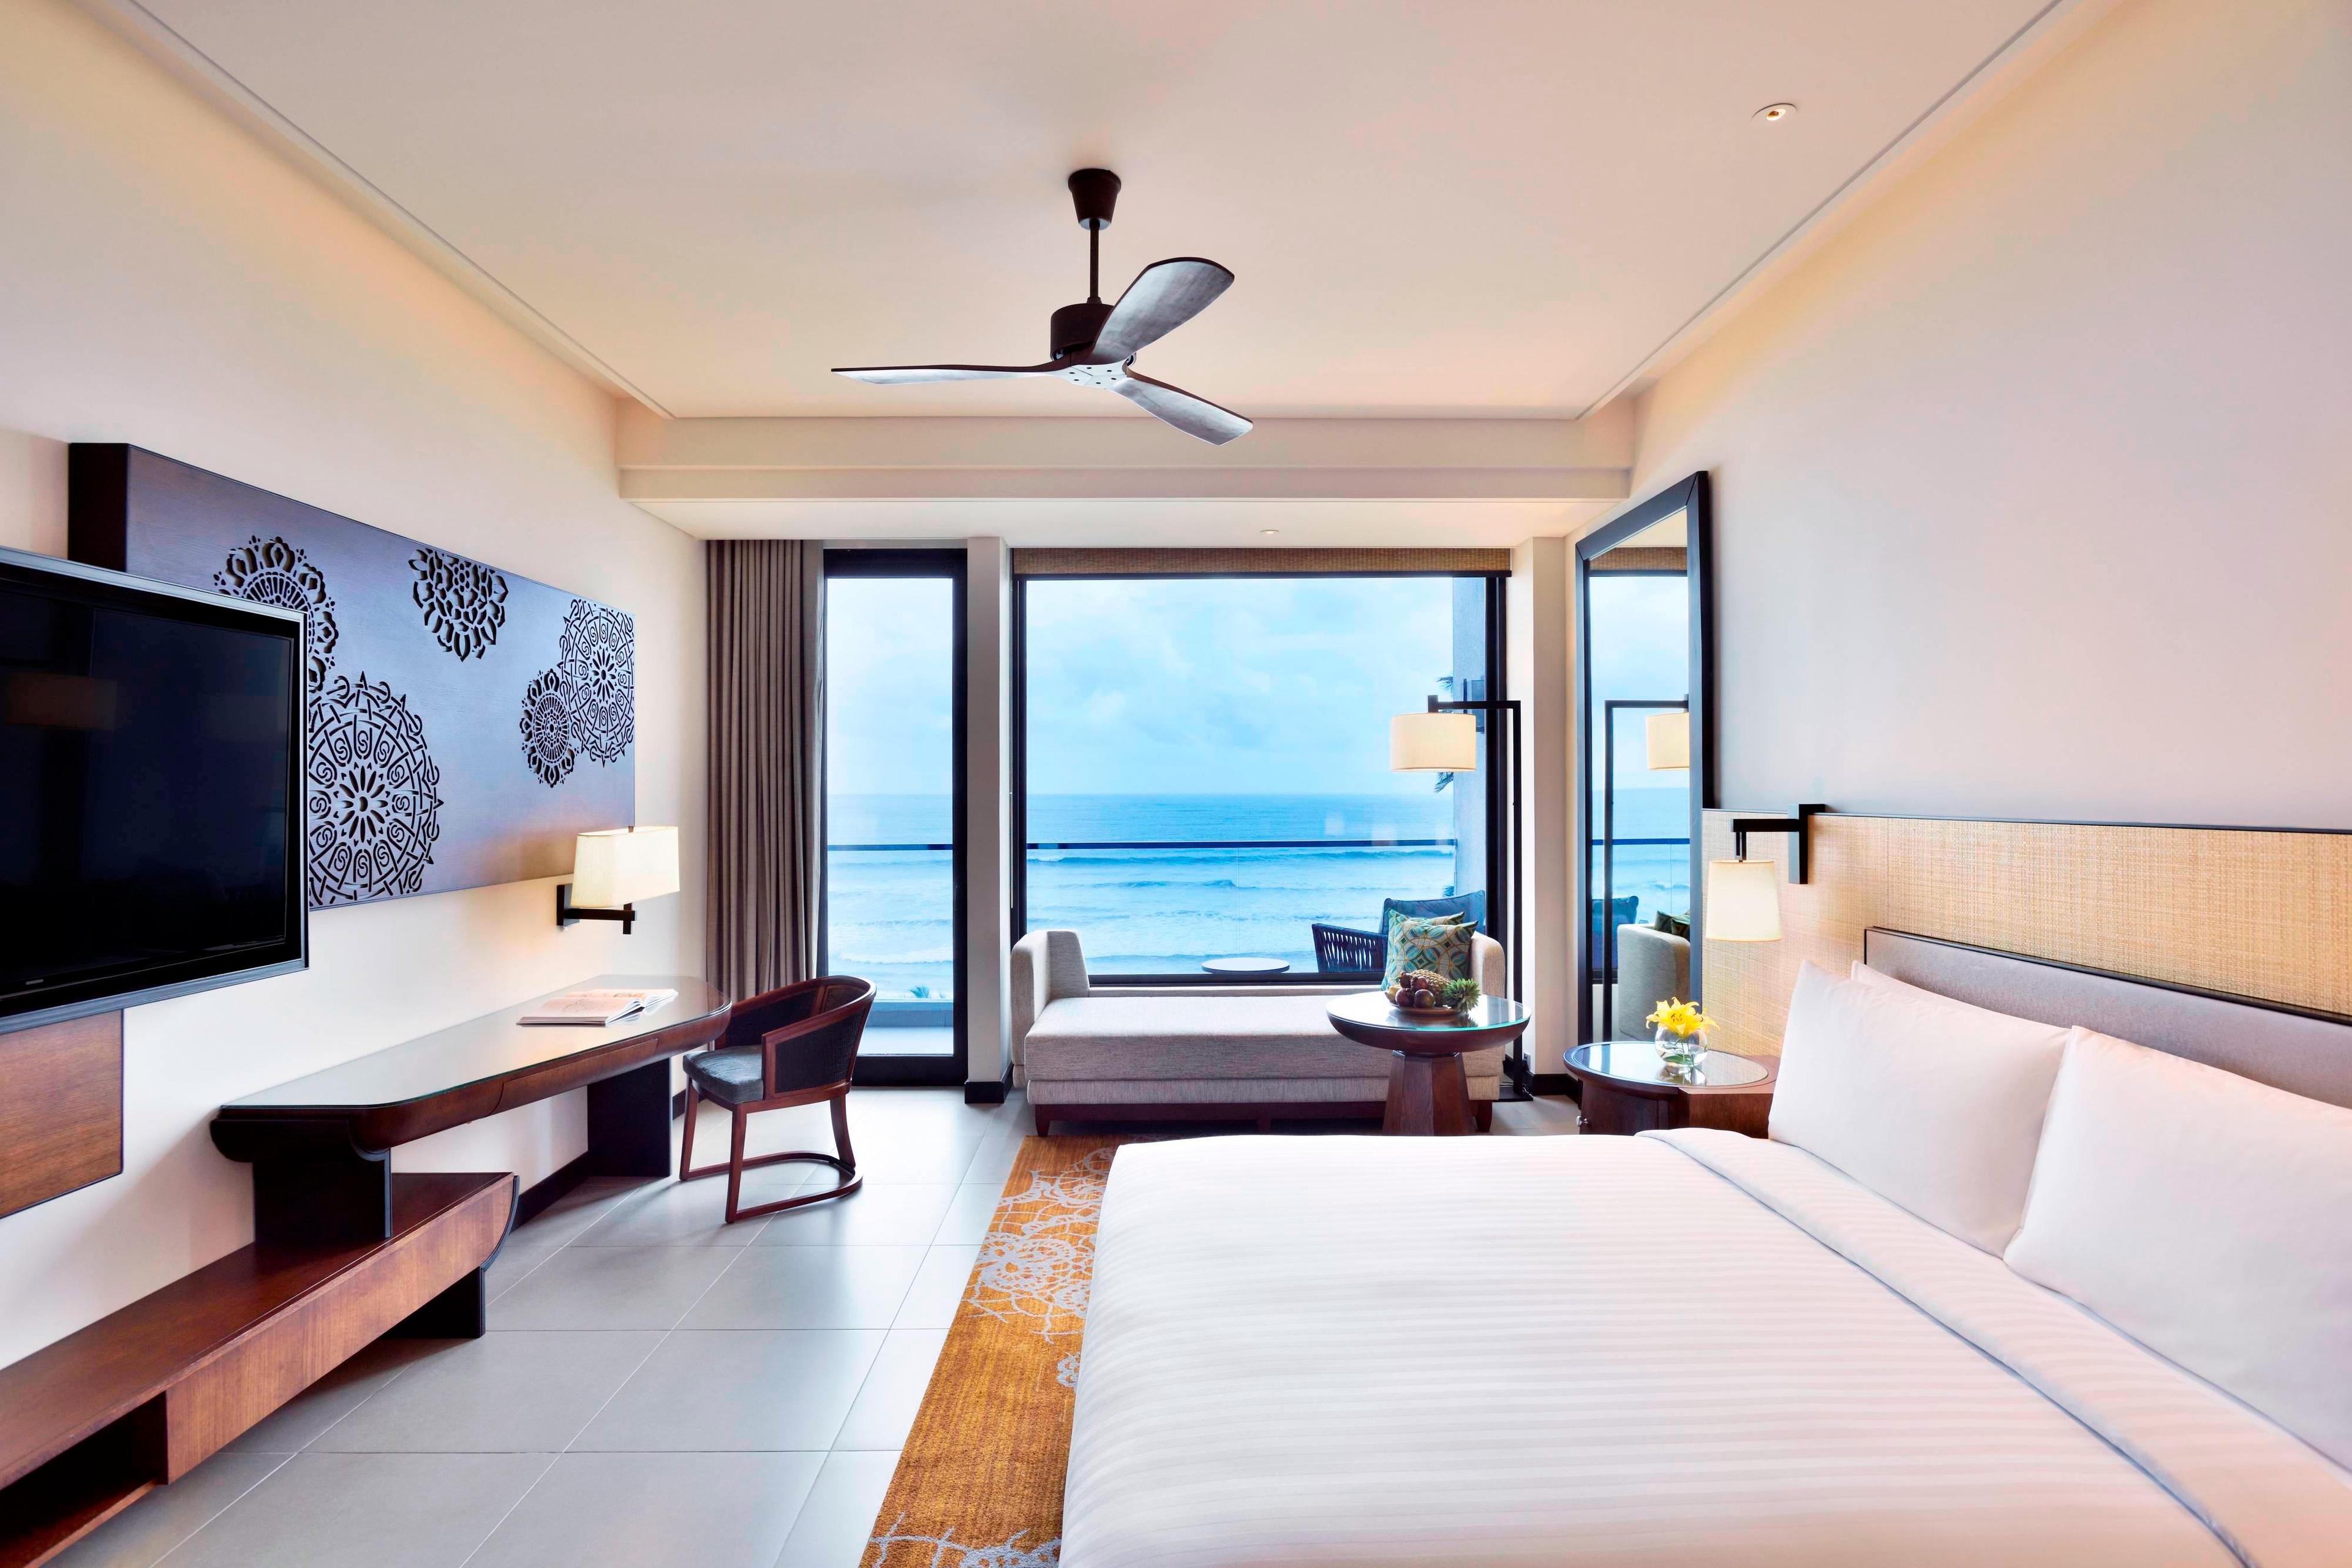 Inspired by traditional Sri Lankan style, our King Ocean Vista Guest Rooms feature wood furniture, tasteful décor, panoramic windows and large balconies.